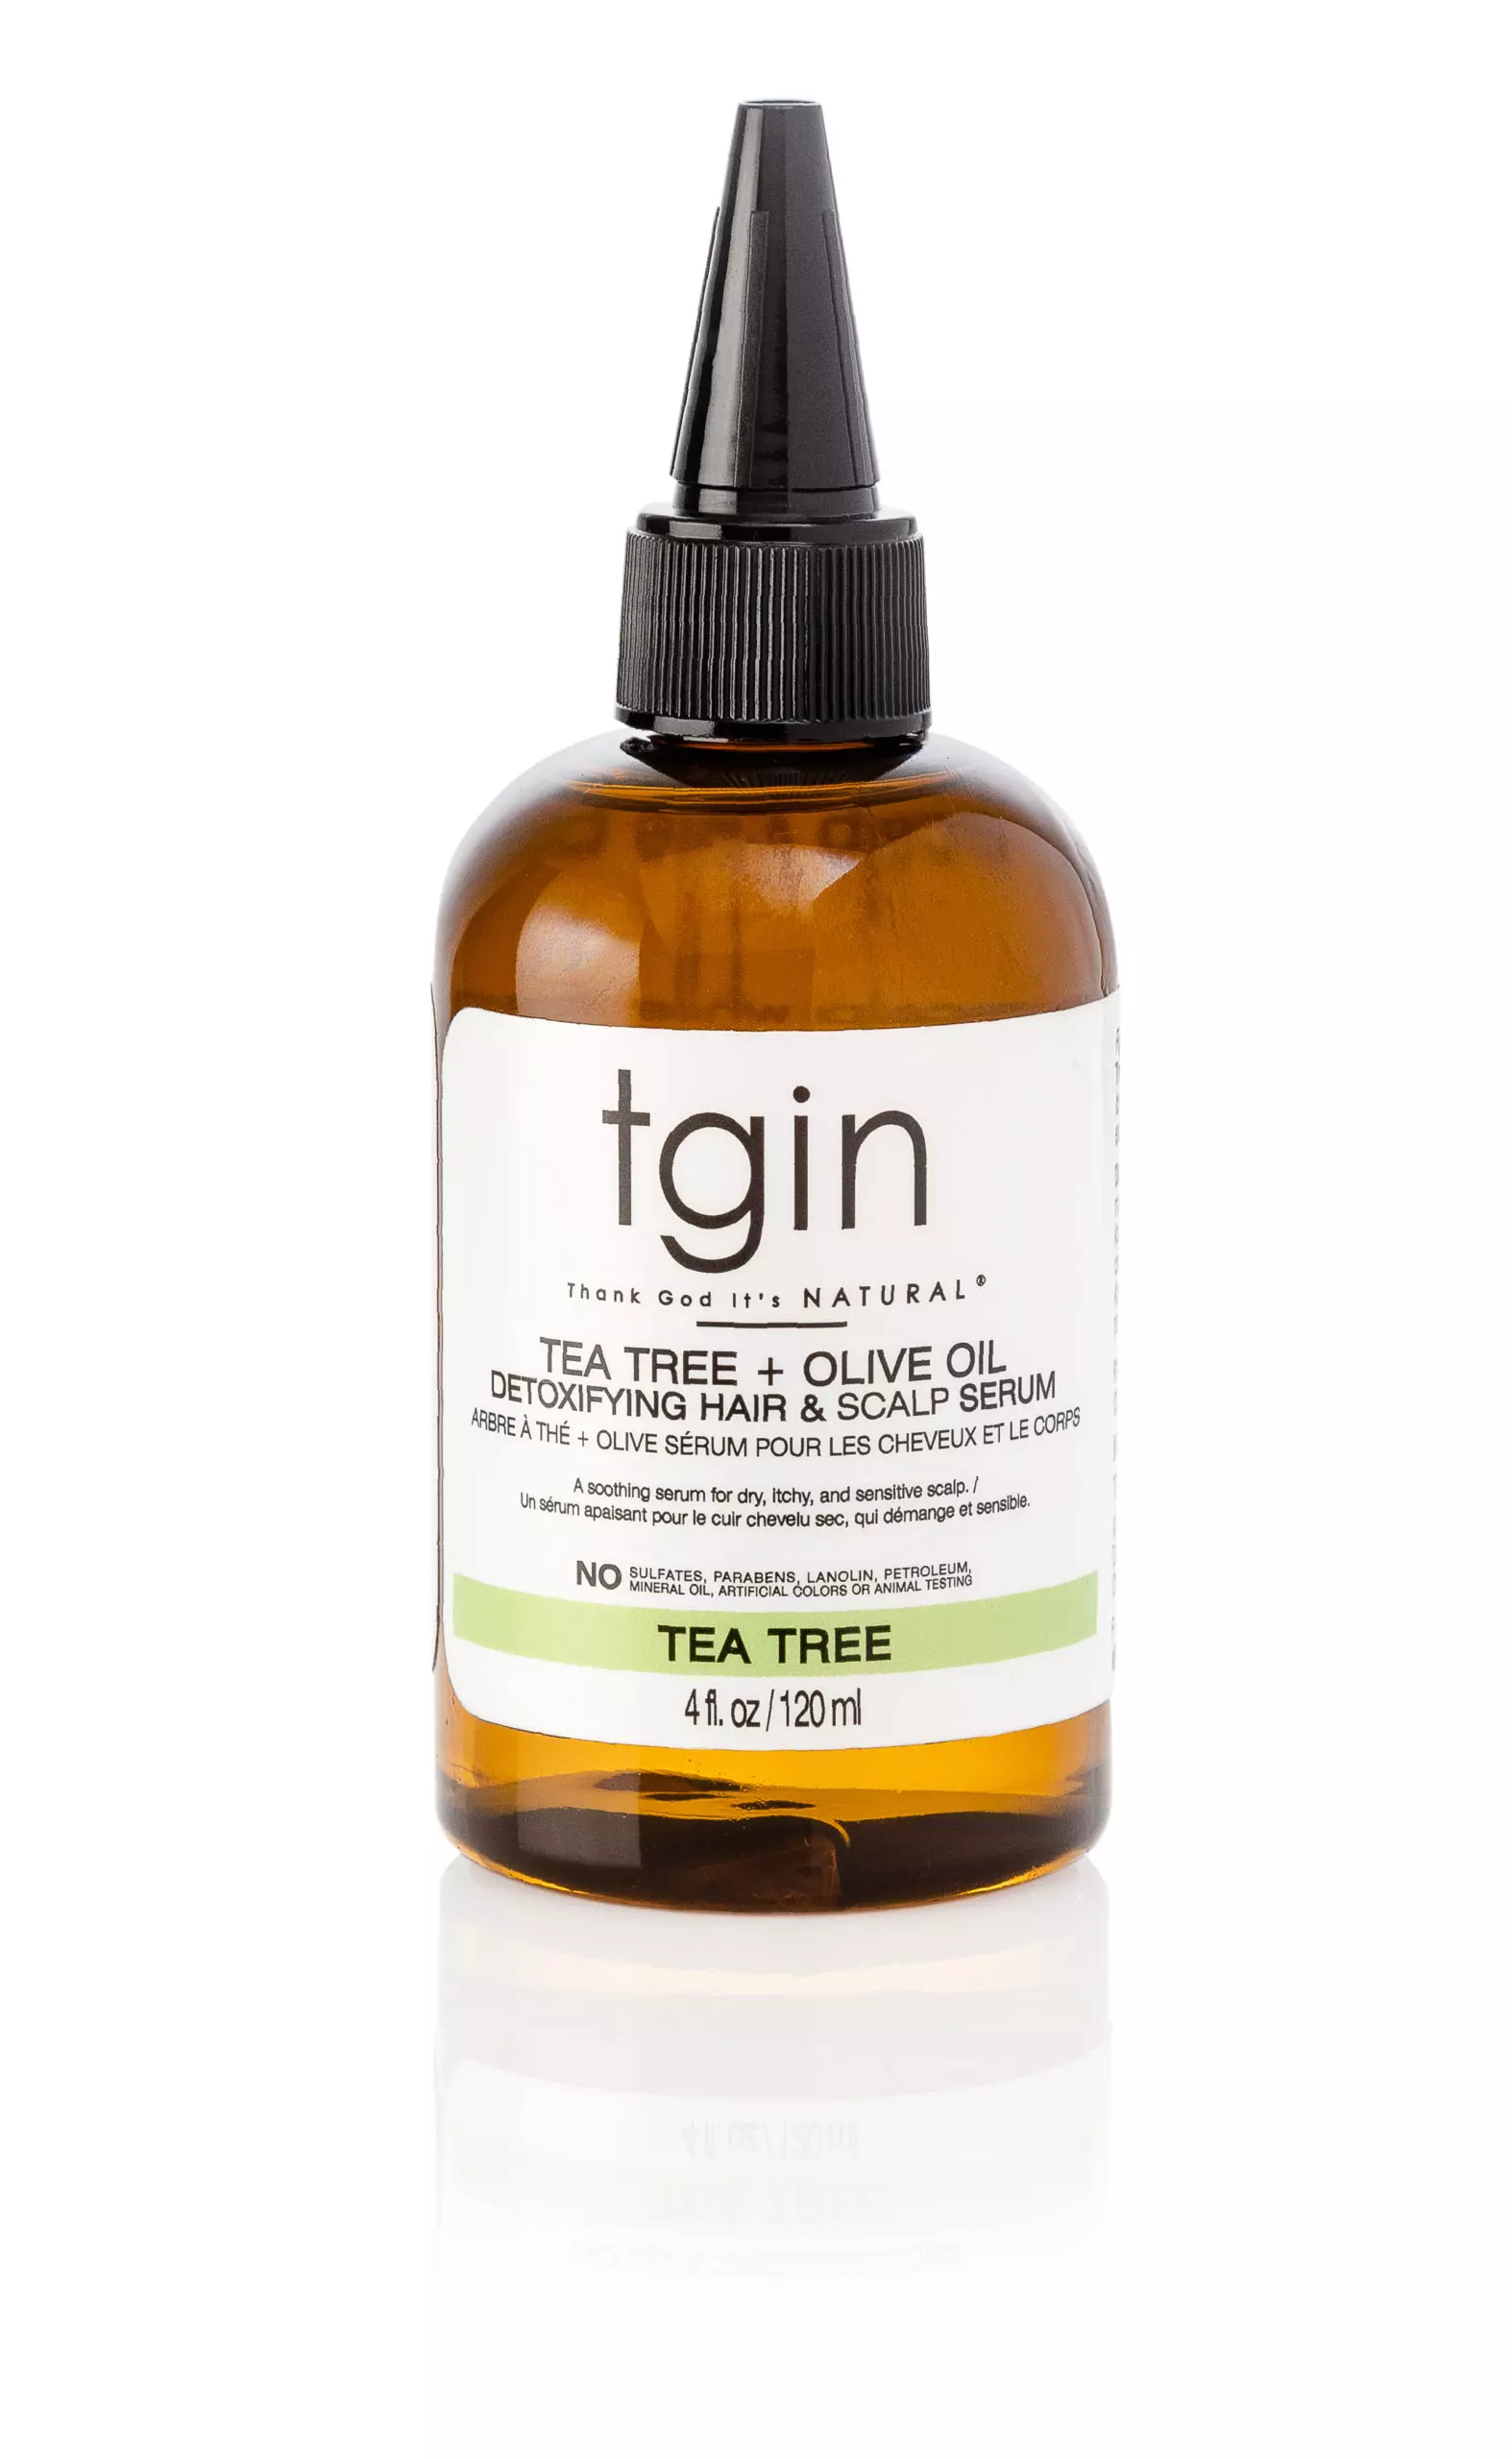 tgin Tea Tree + Olive Oil Detoxifying Dry Itchy Hair And Scalp Serum - 4 Oz